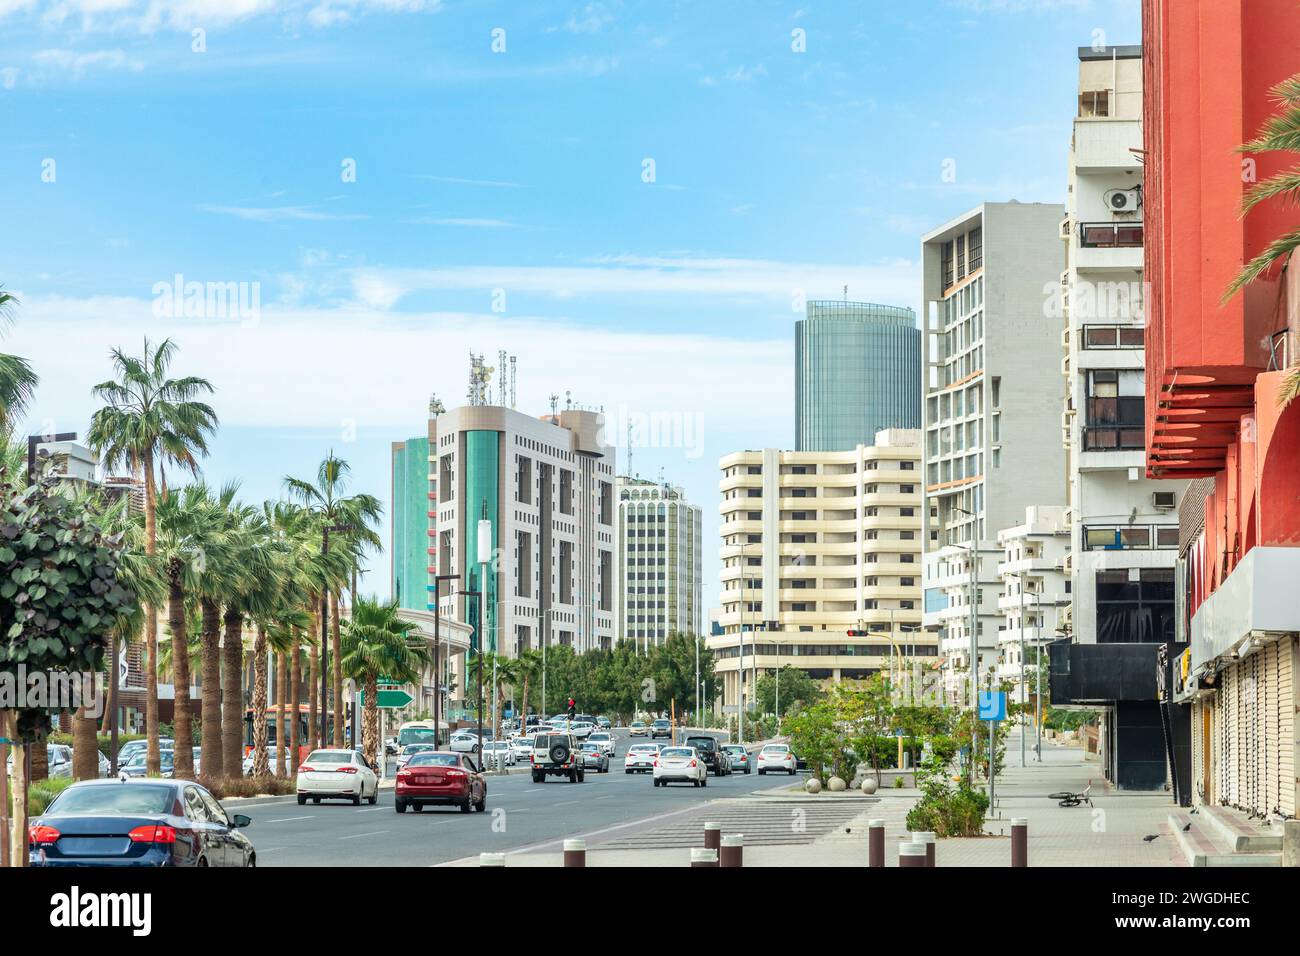 Jeddah downtown central district street with road full of car traffic and modern buildings in the background, Saudi Arabia Stock Photo